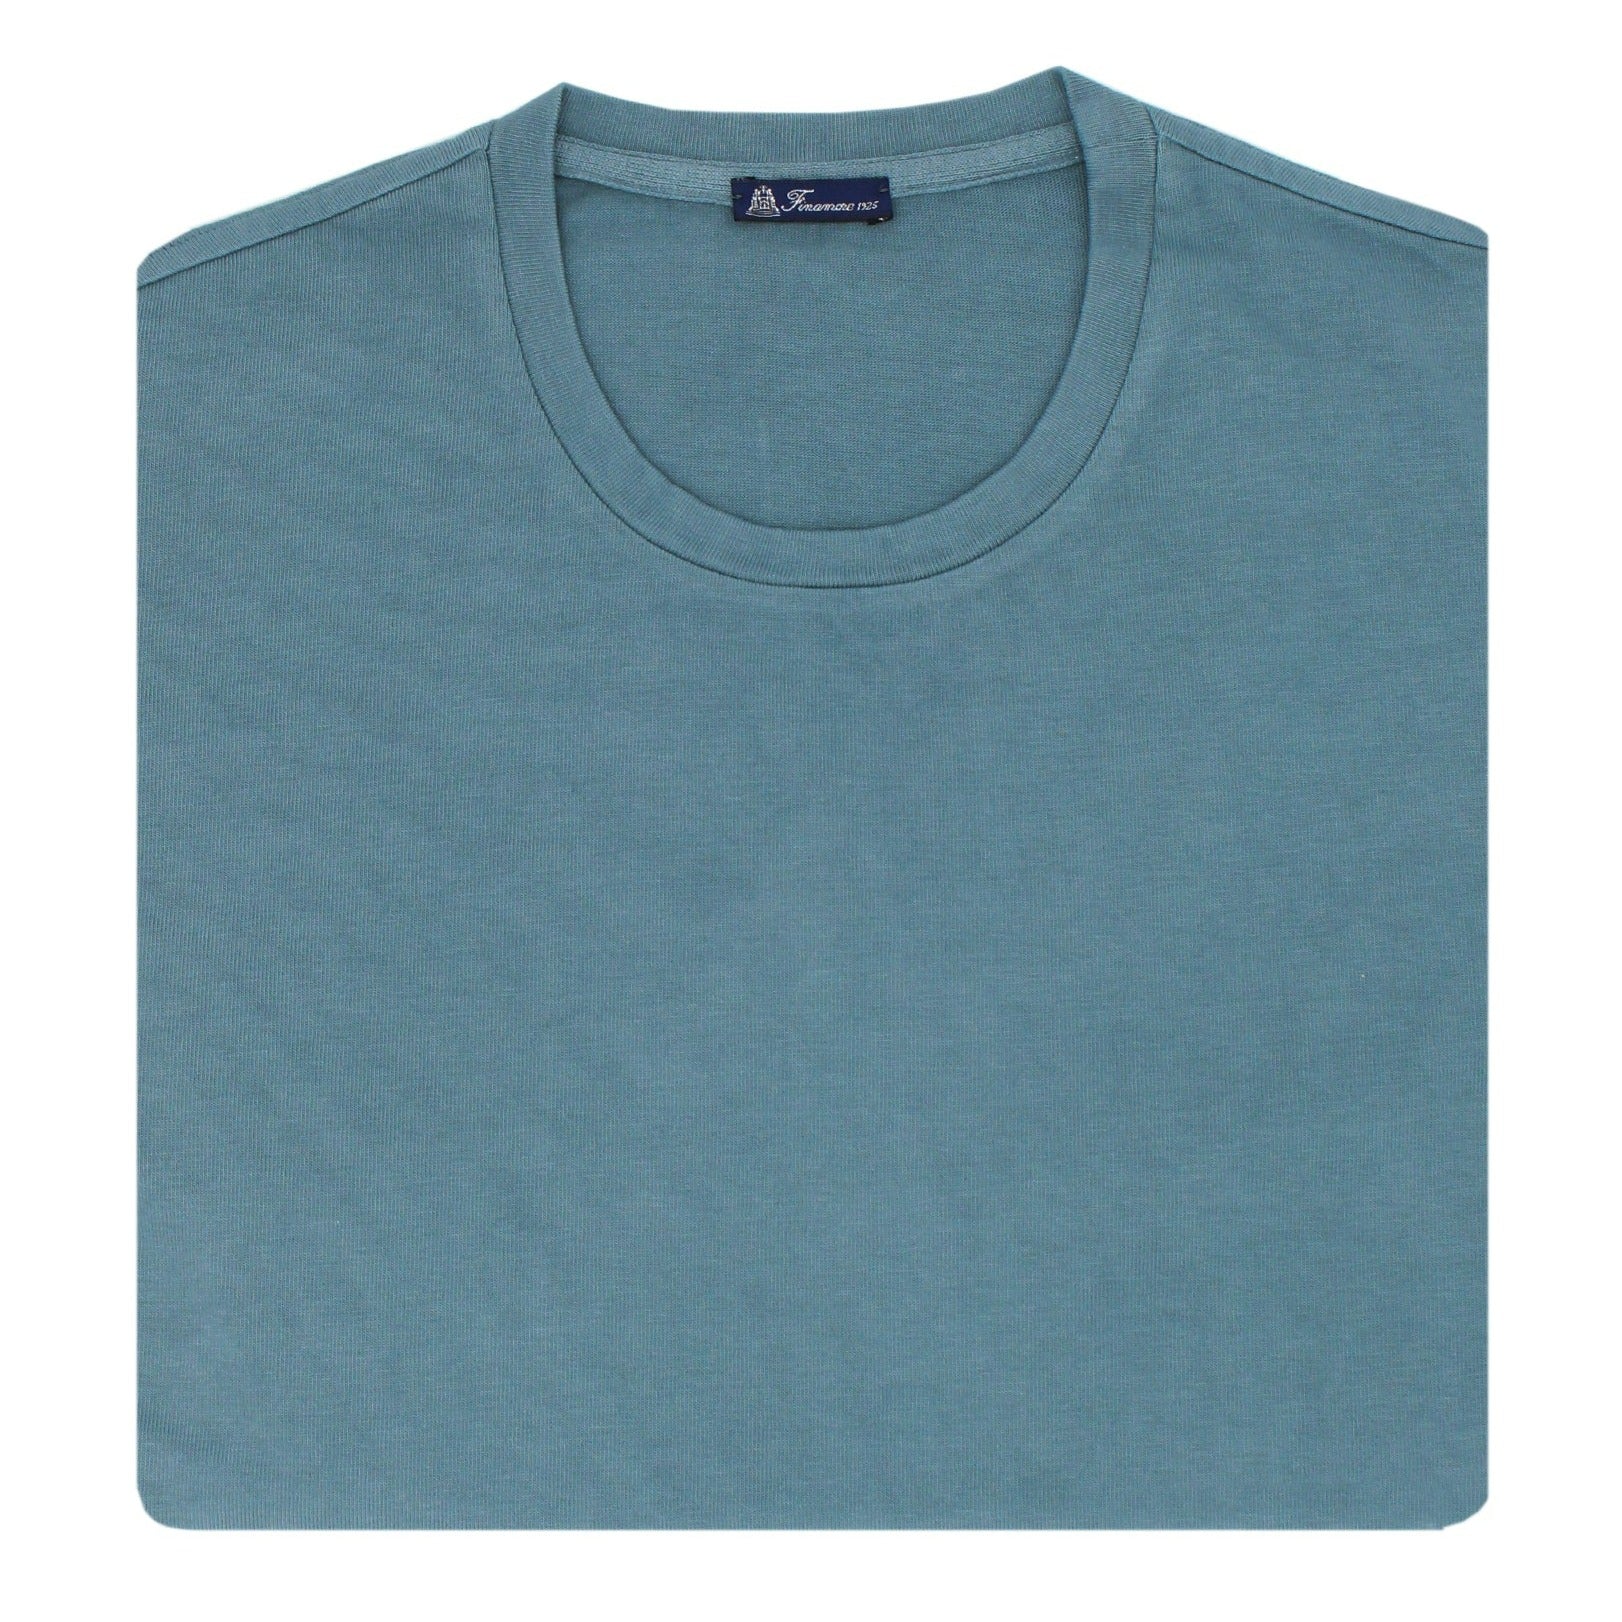 Turquoise garment dyed cotton T-shirt with Finamore 1925 logo